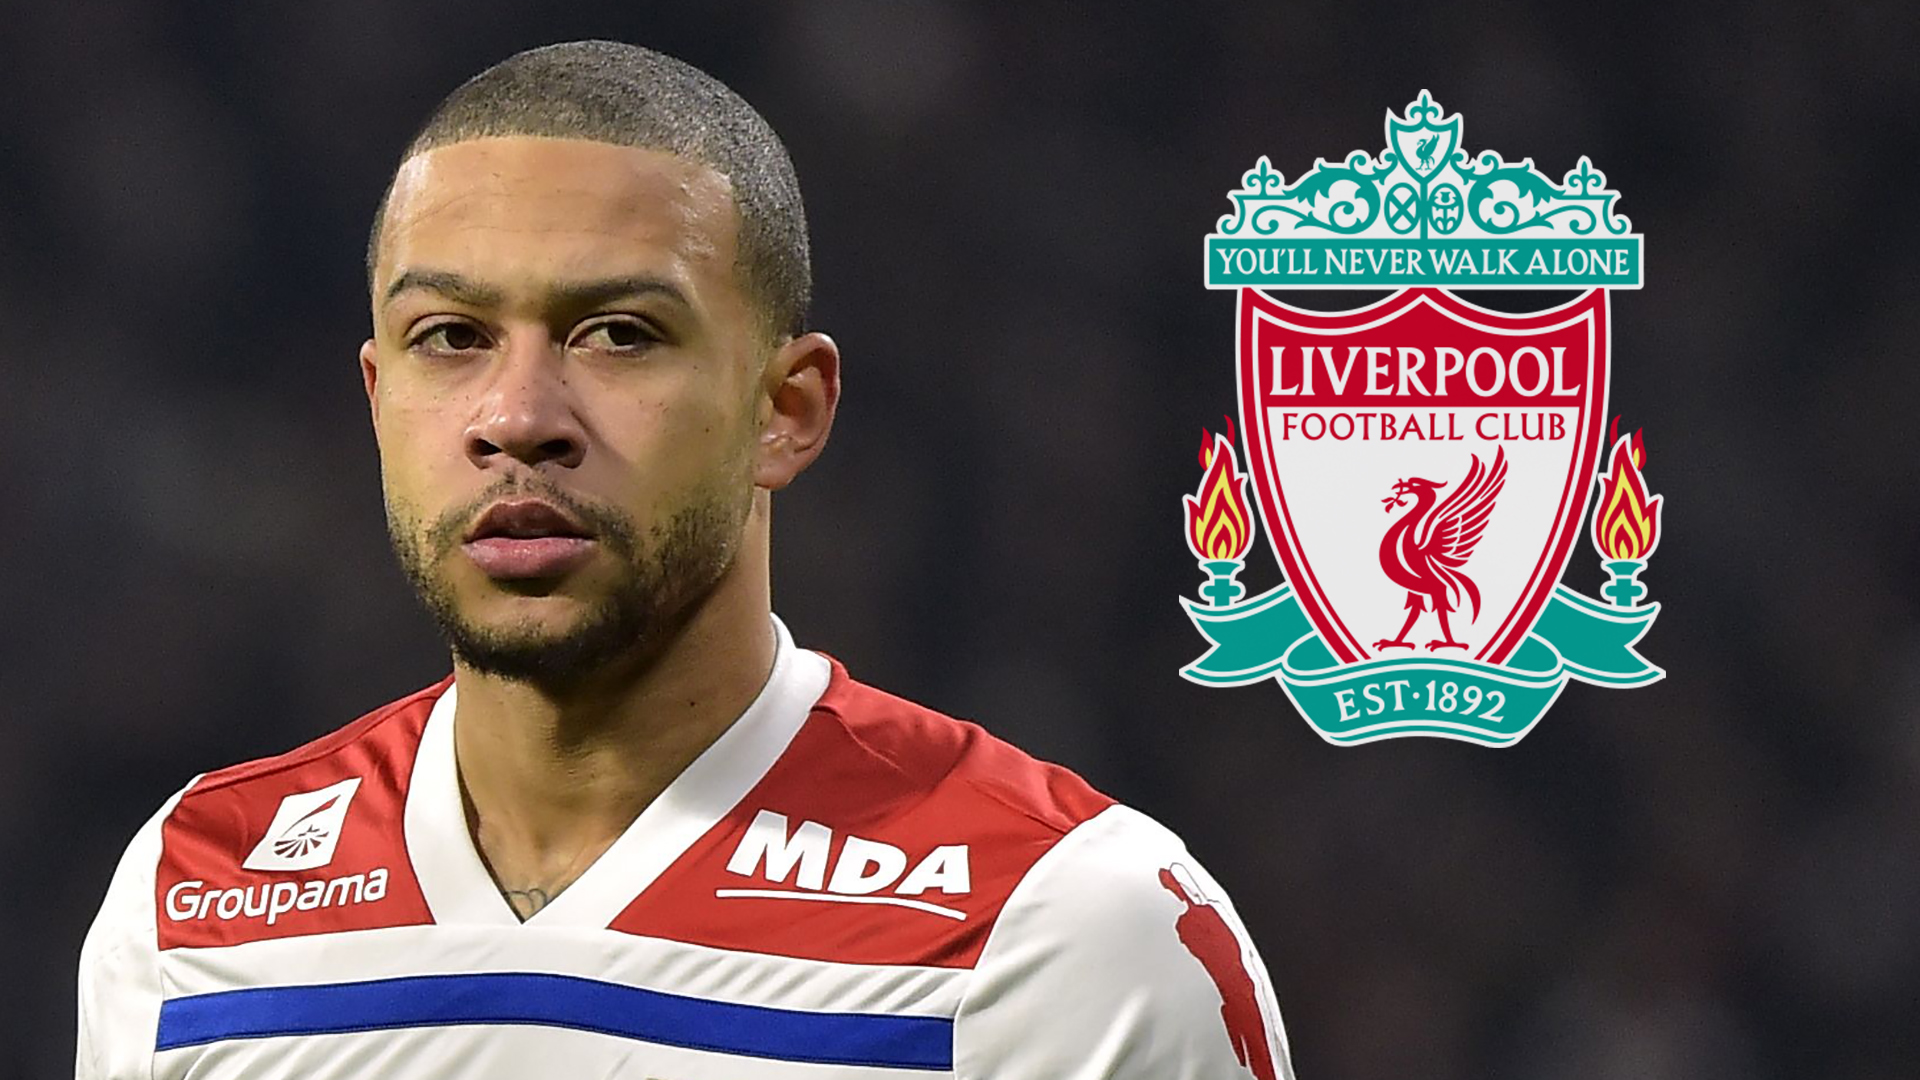 Transfer news and rumours LIVE: Liverpool looking to replace Mane with Depay | Goal.com